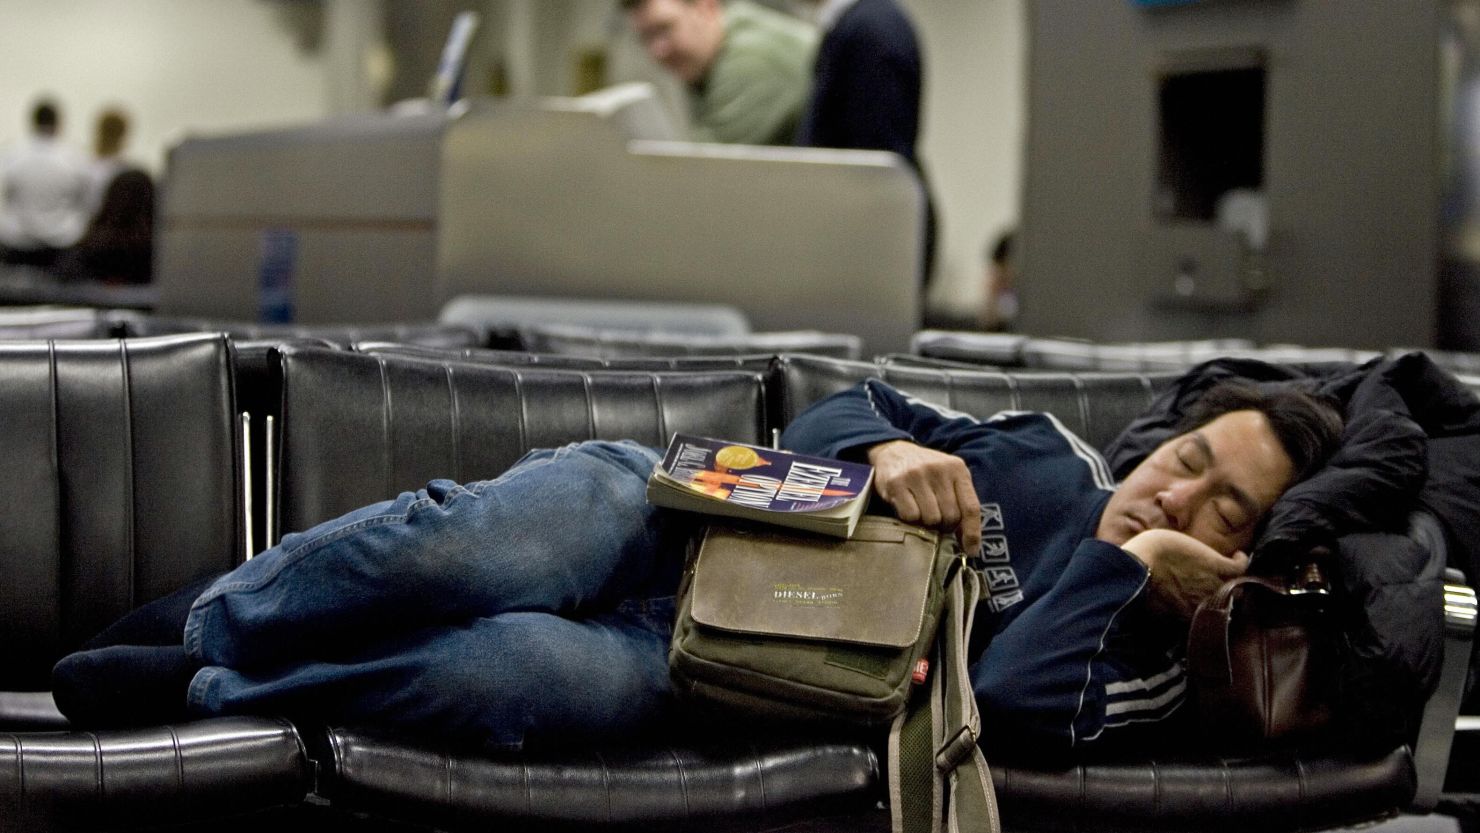 Standby passengers often resort to sleeping in airports while waiting for an open seat on a flight.